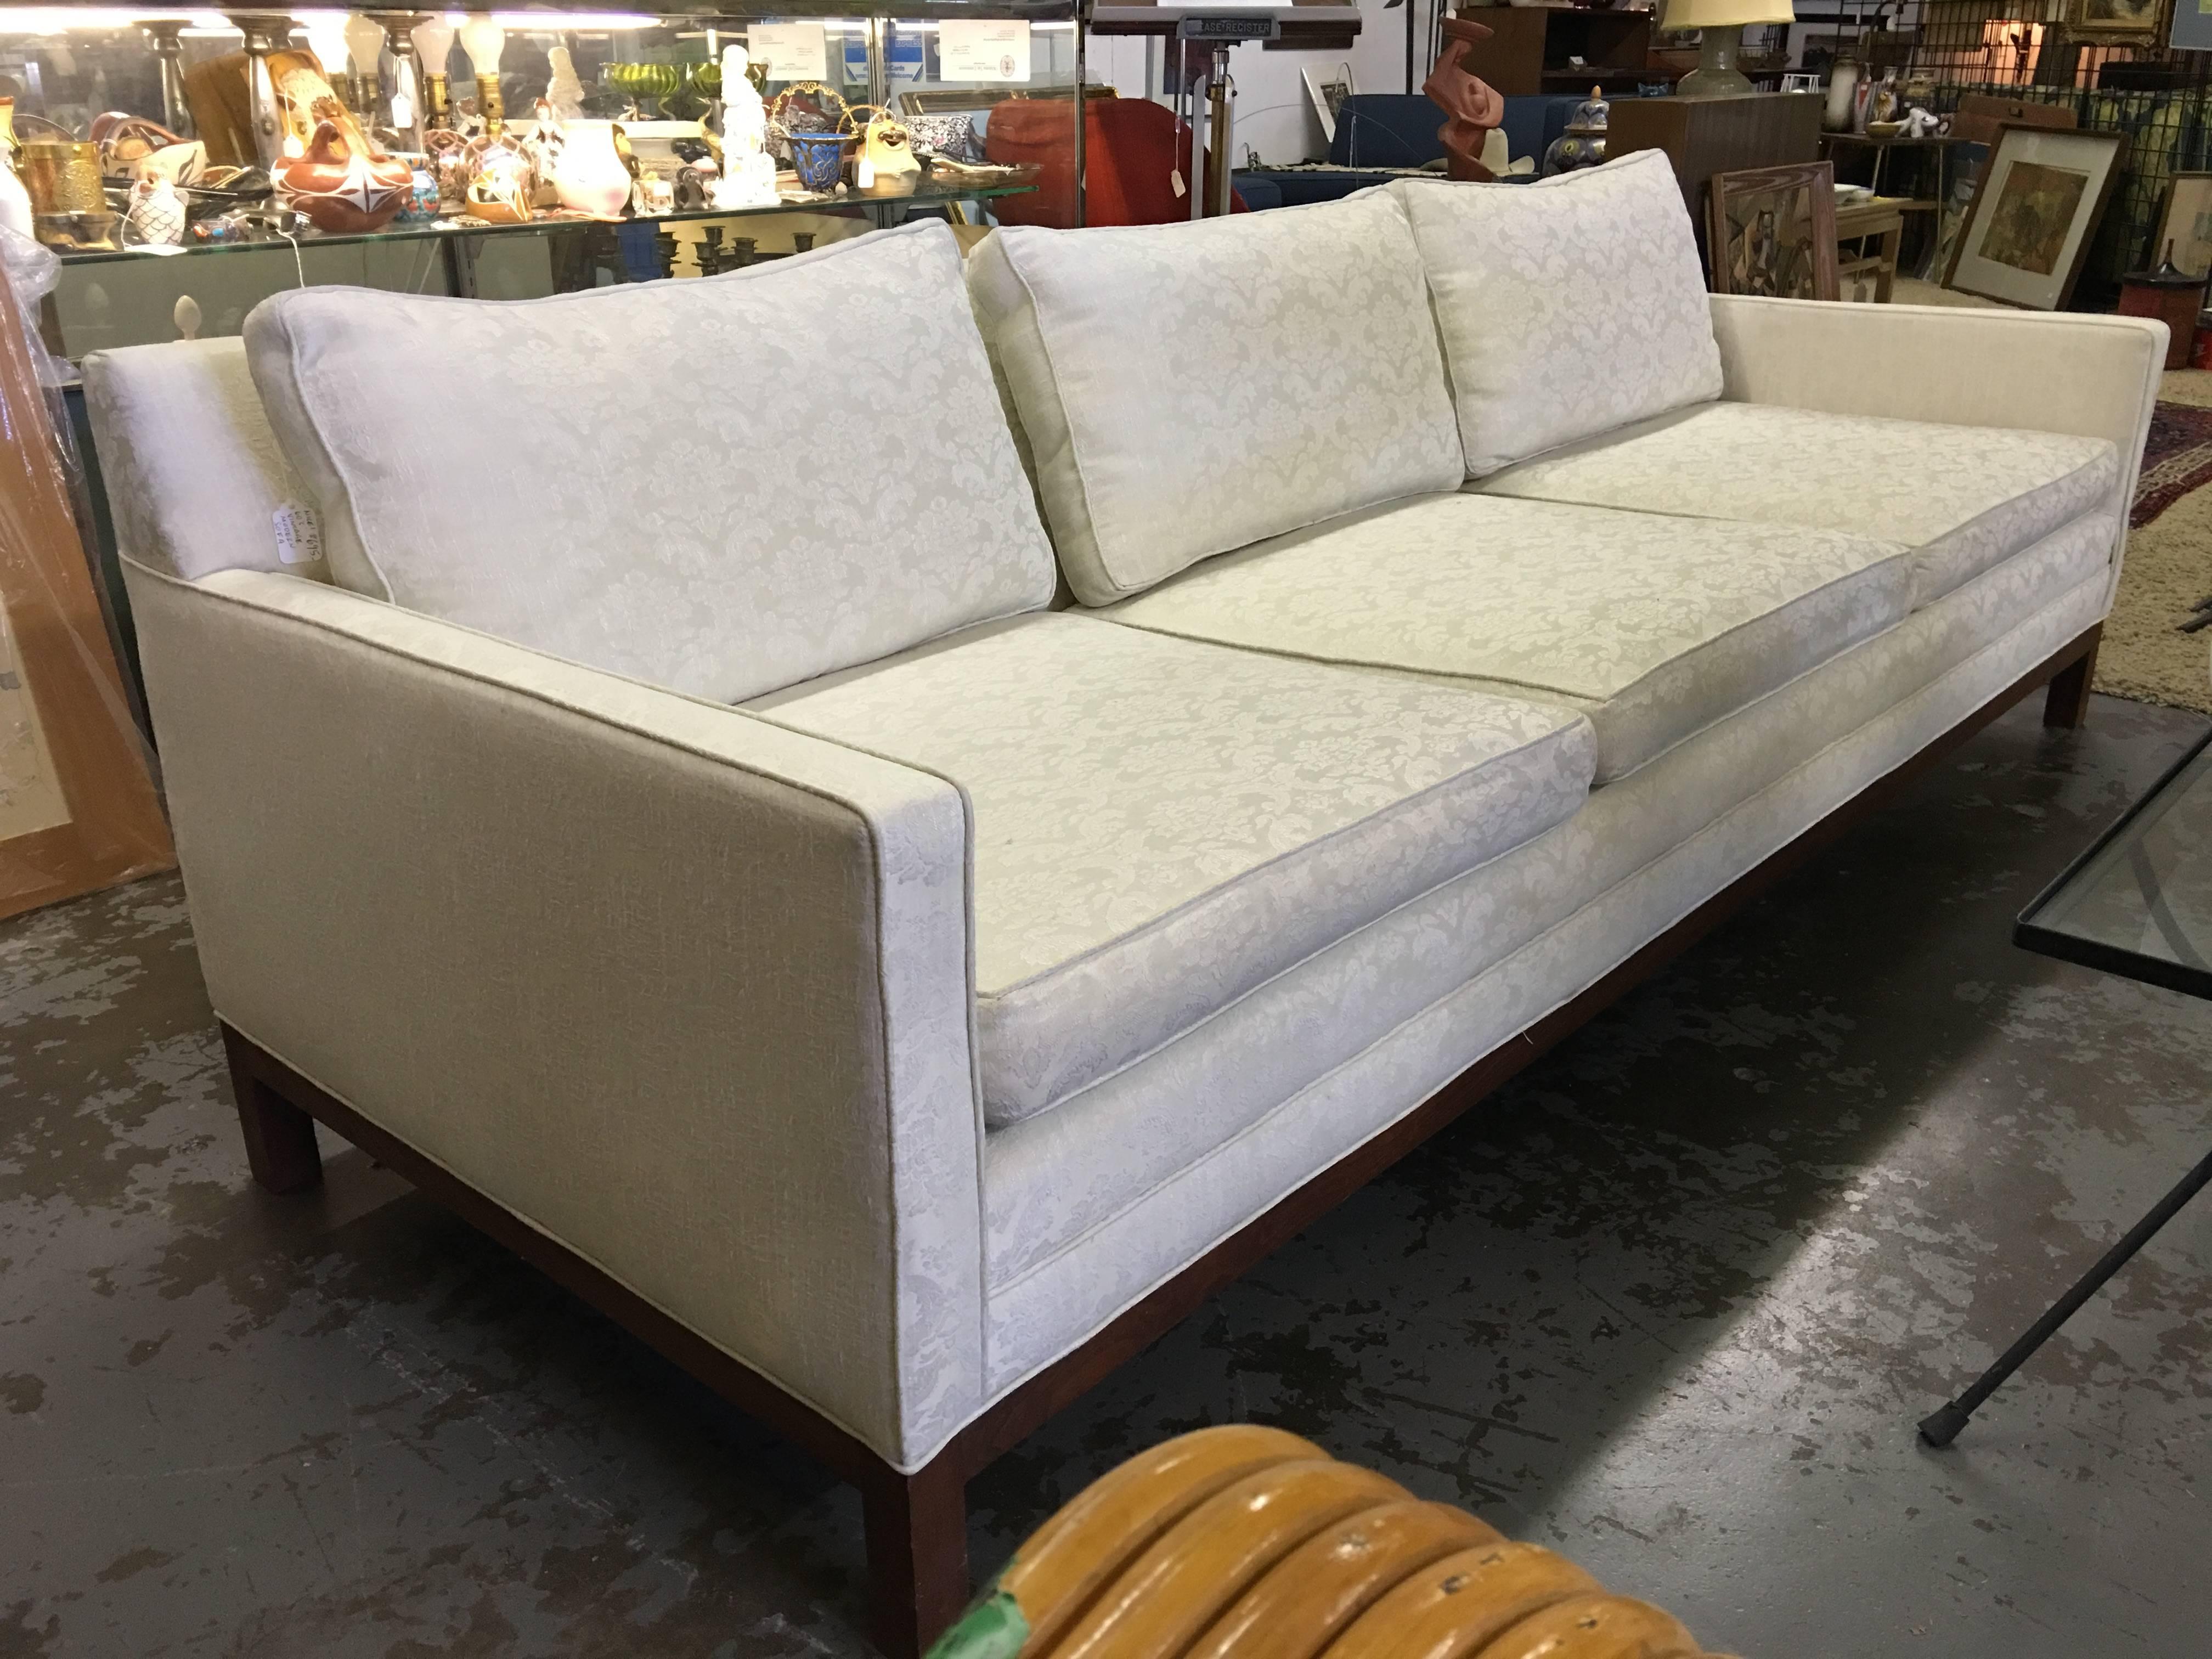 This is a very nice low sleek scale sofa designed by Milo Baughman for Dillingham. It rests on a walnut bracket base. It is done in a fanch tone on tone off-white damask material, you will need to redo. It has several light spots, not too bad. It is